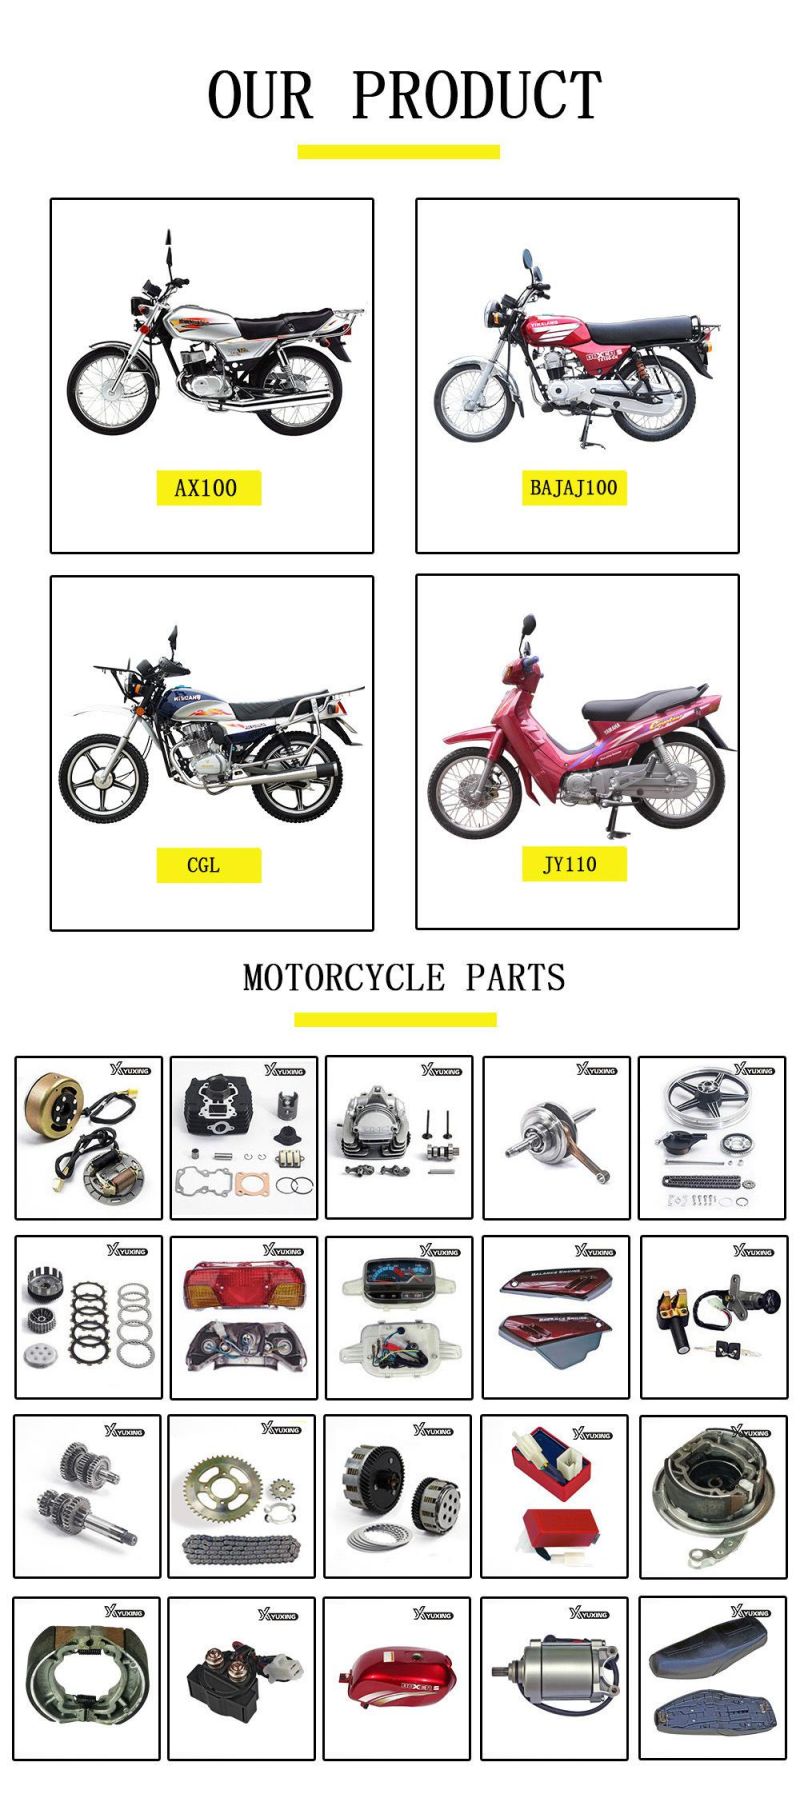 Yuxing Motorcycle Spare Parts Maintenance-Free Yt4l-BS 12V4ah Motorcycle Battery for Motorbike